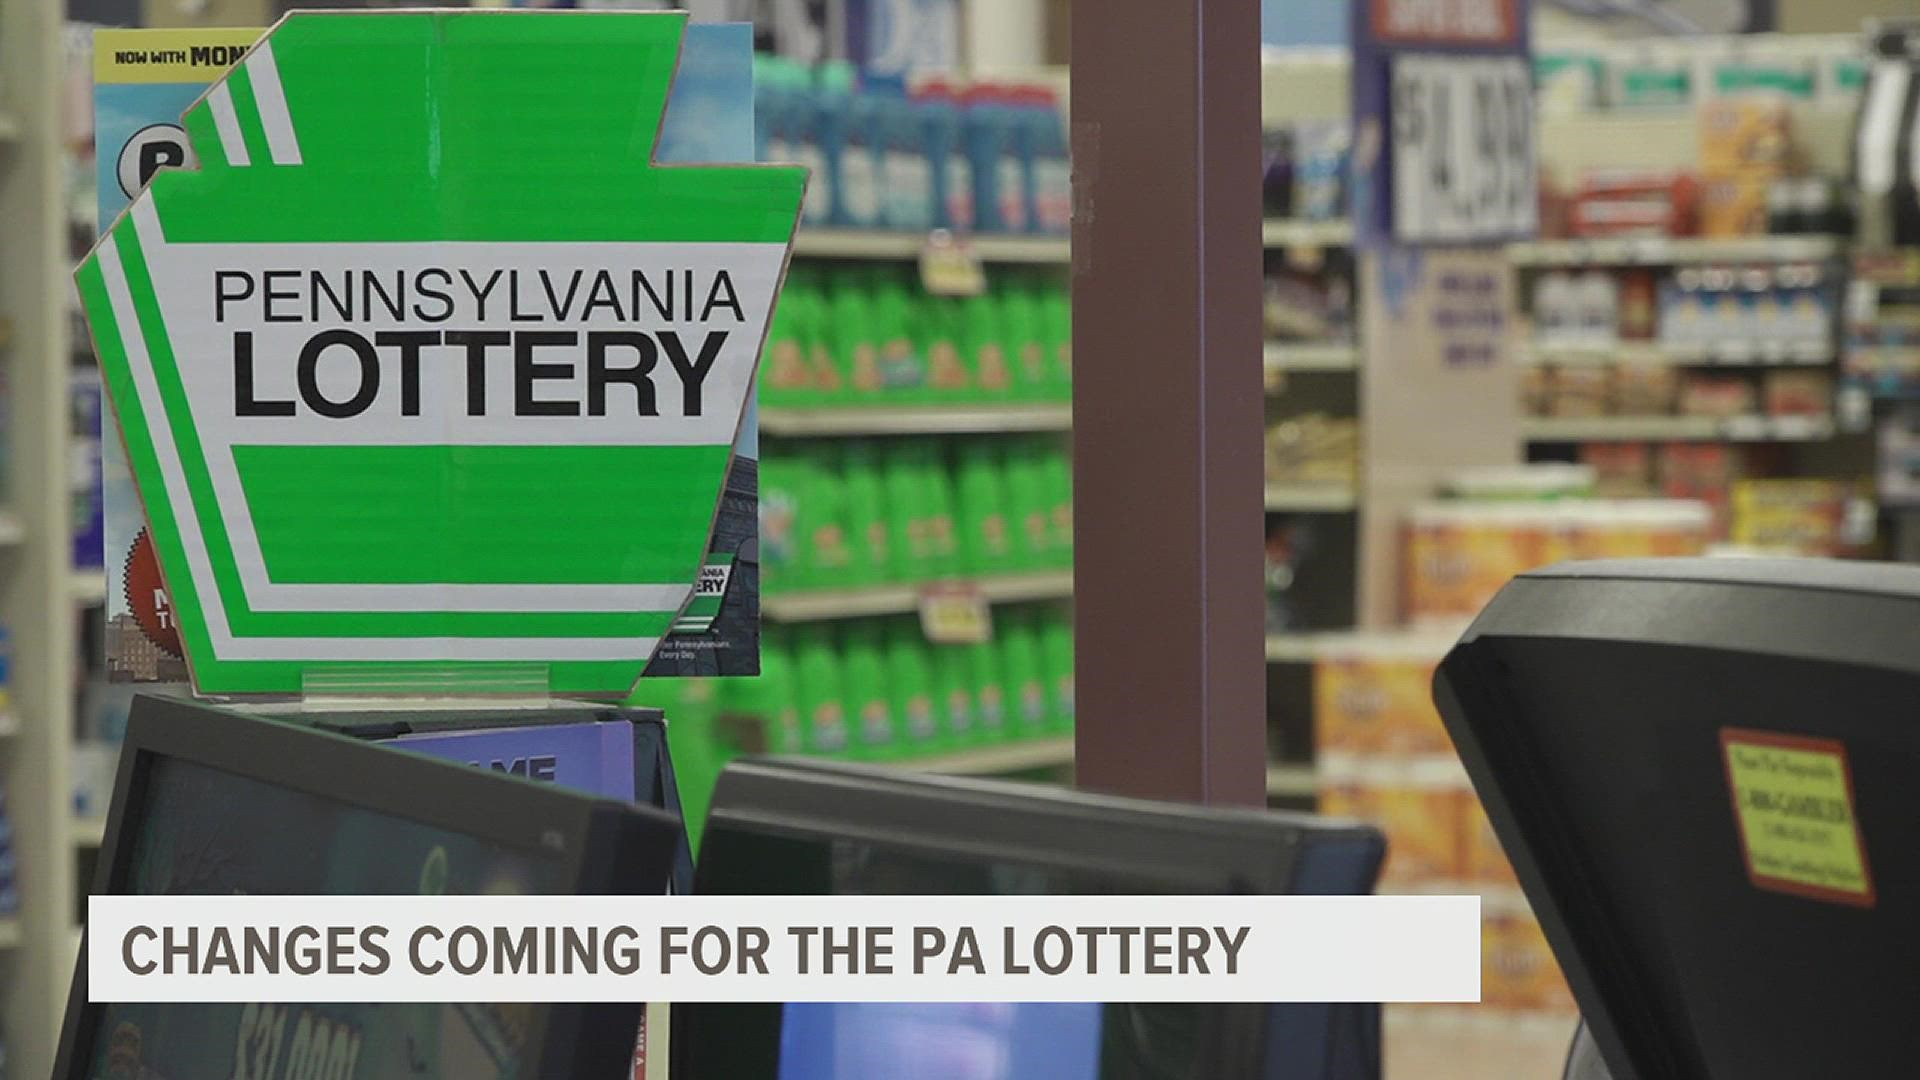 The PA Lottery turns 50 in March of next year.